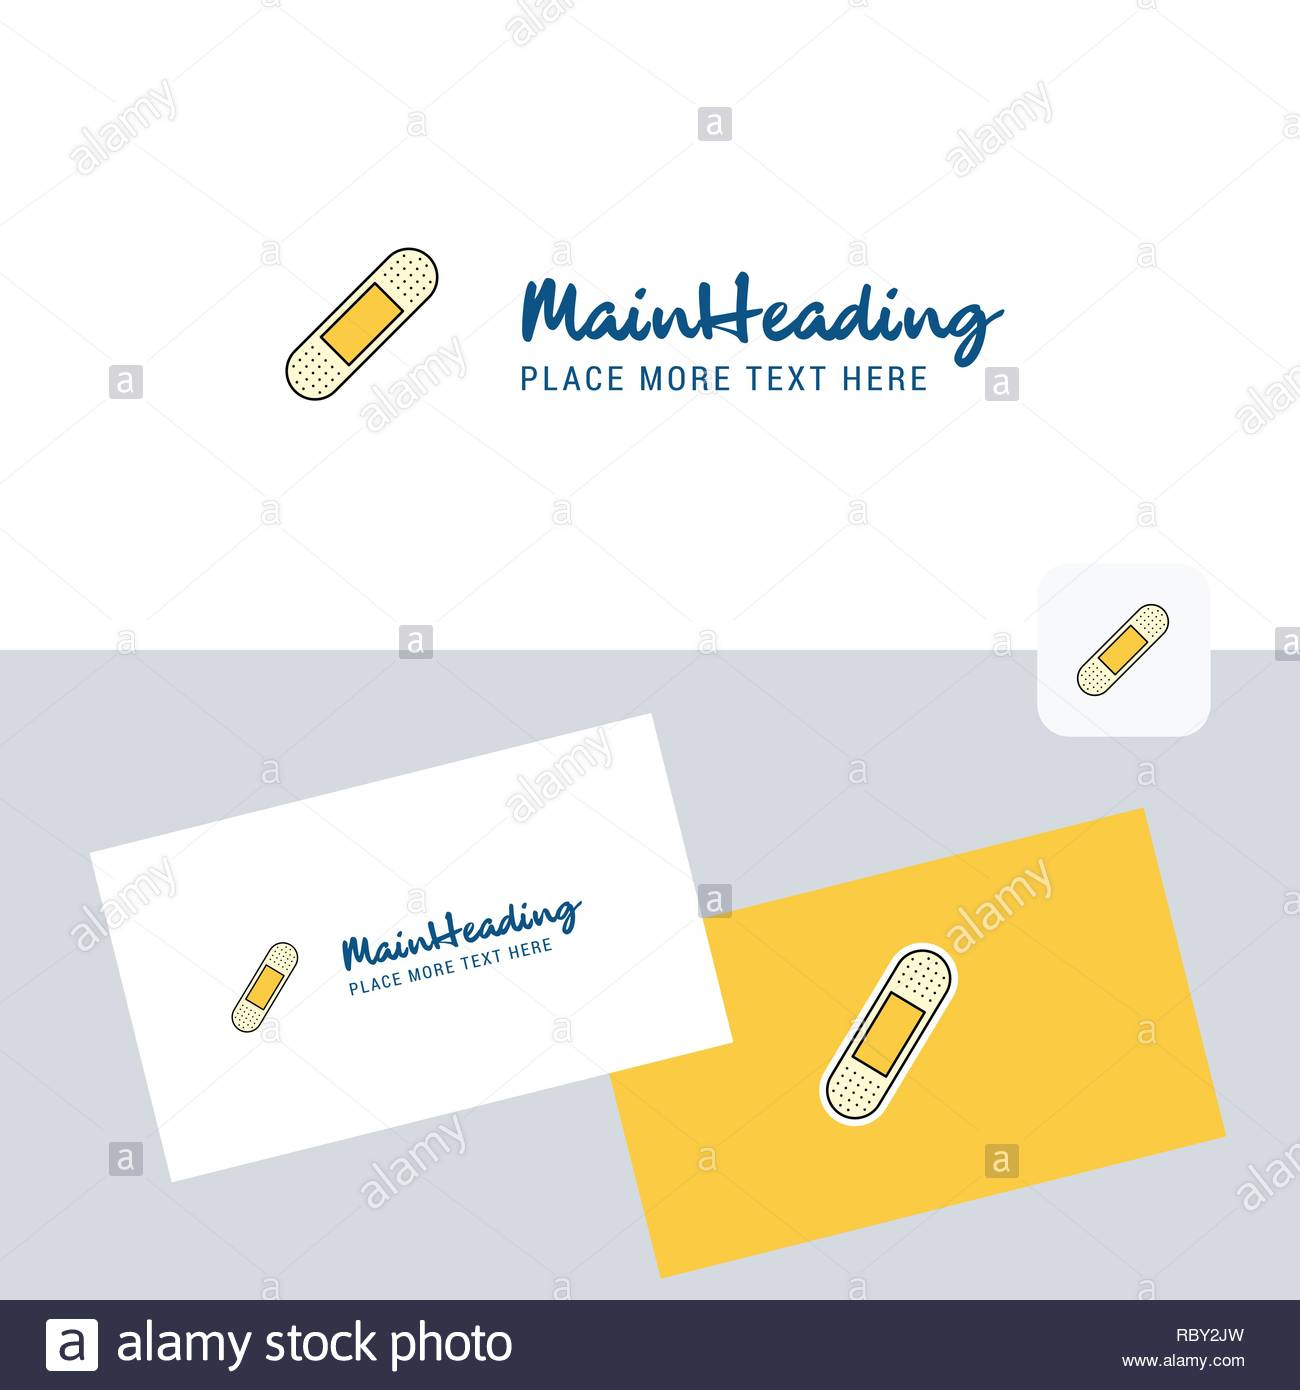 Plaster Vector Logotype With Business Card Template. Elegant Pertaining To Plastering Business Cards Templates